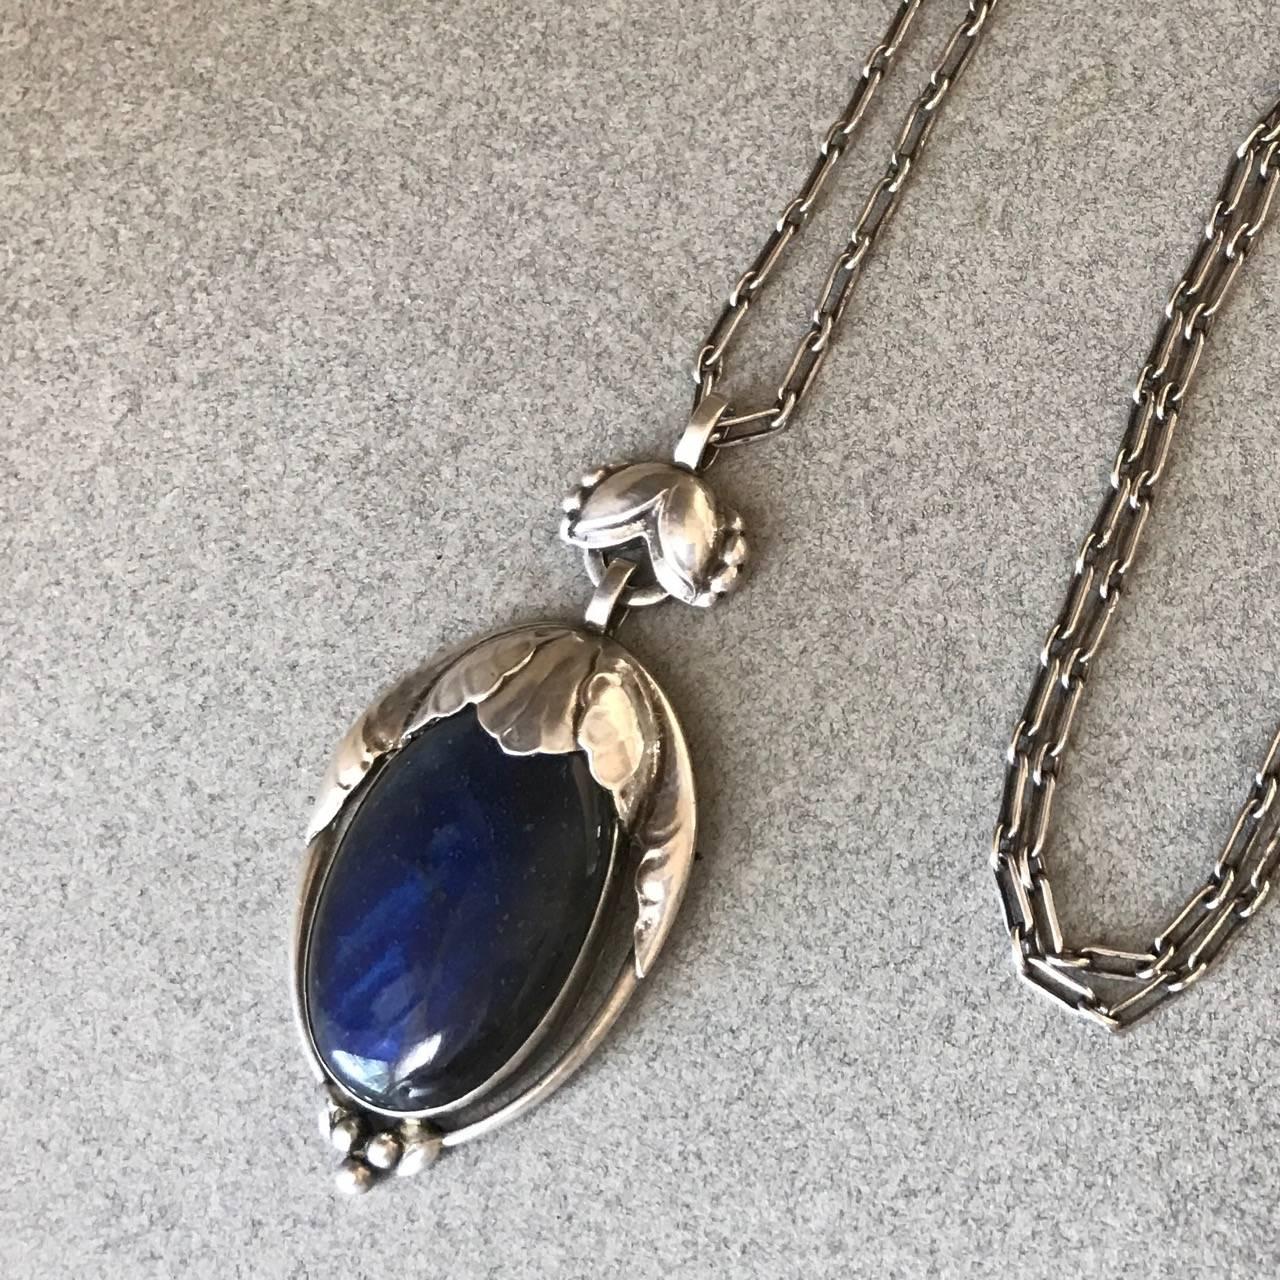 Georg Jensen Large 830 Silver Pendant No 54 With Labradorite, Very Rare.

Exceptional detail and gem quality labradorite with deep iridescent blue. 

32 inch  Handmade Paperclip chain with toggle clasp.

